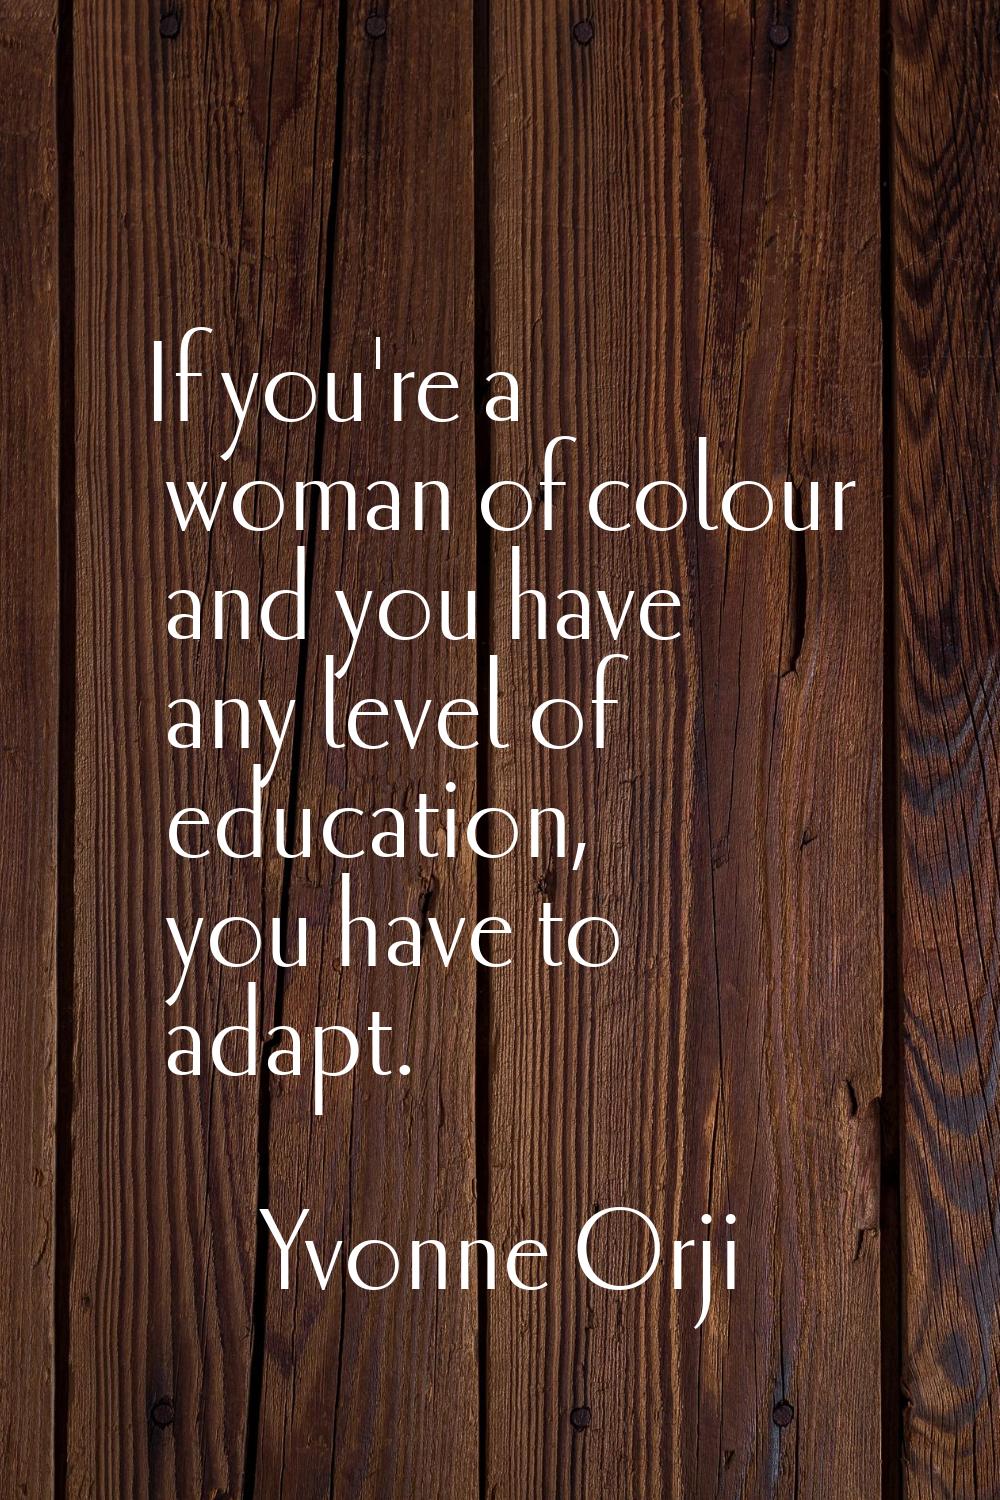 If you're a woman of colour and you have any level of education, you have to adapt.